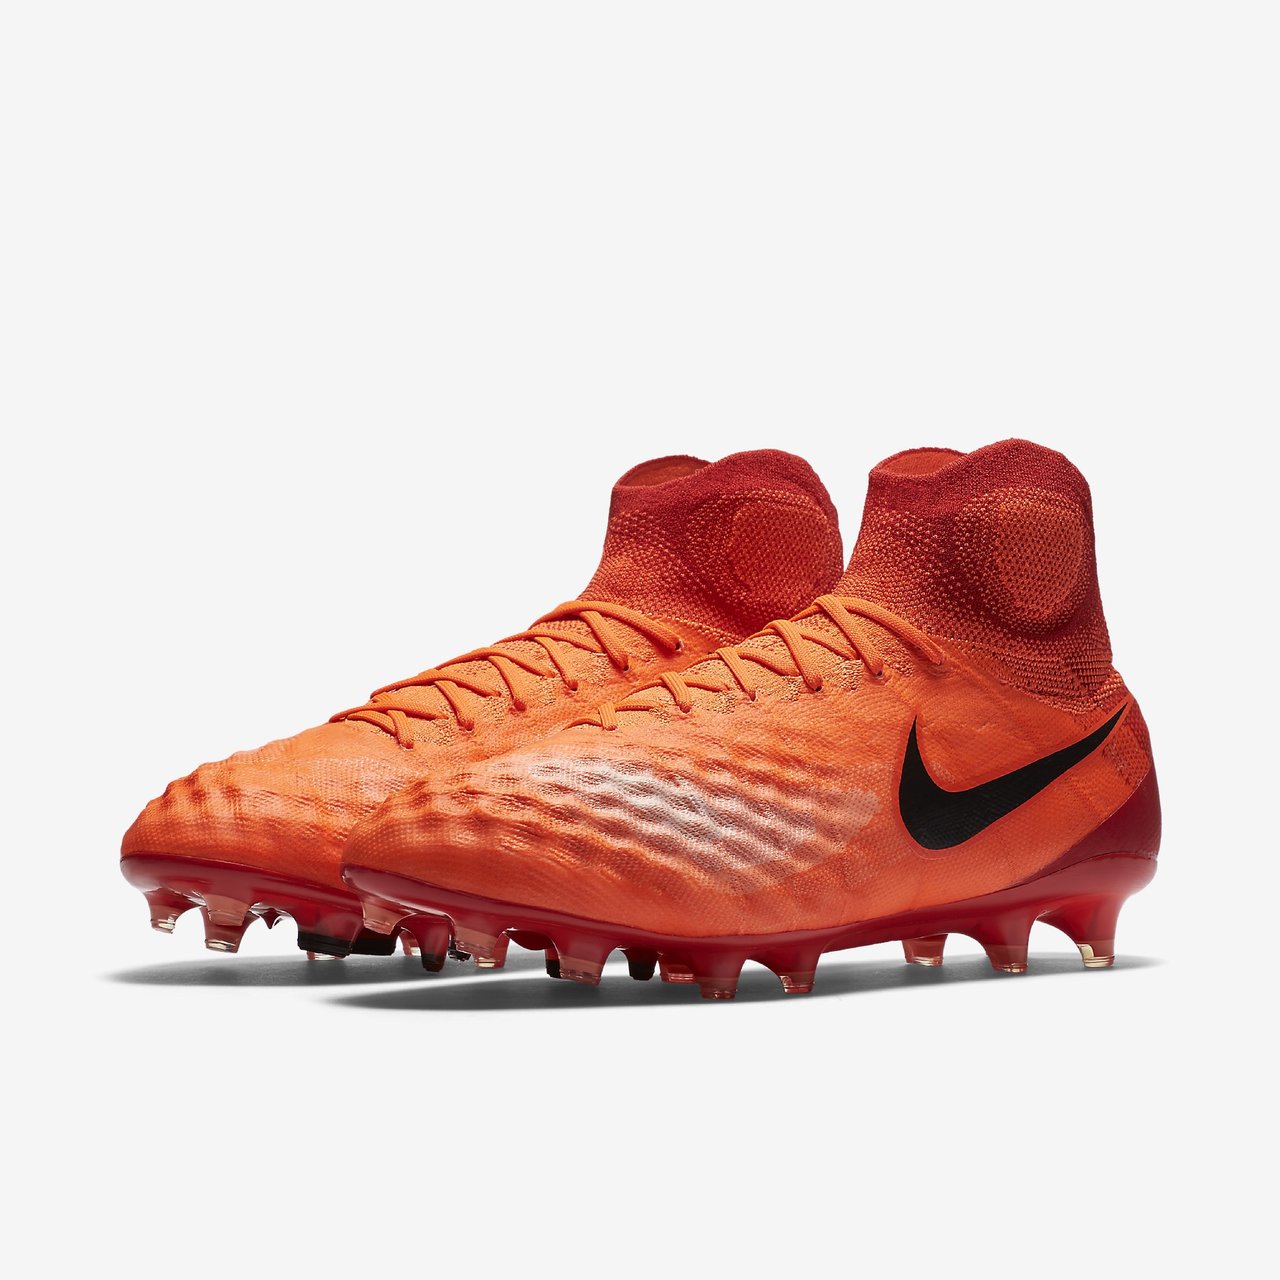 Nike Magistax Proximo Tf Chilling Red White Bump